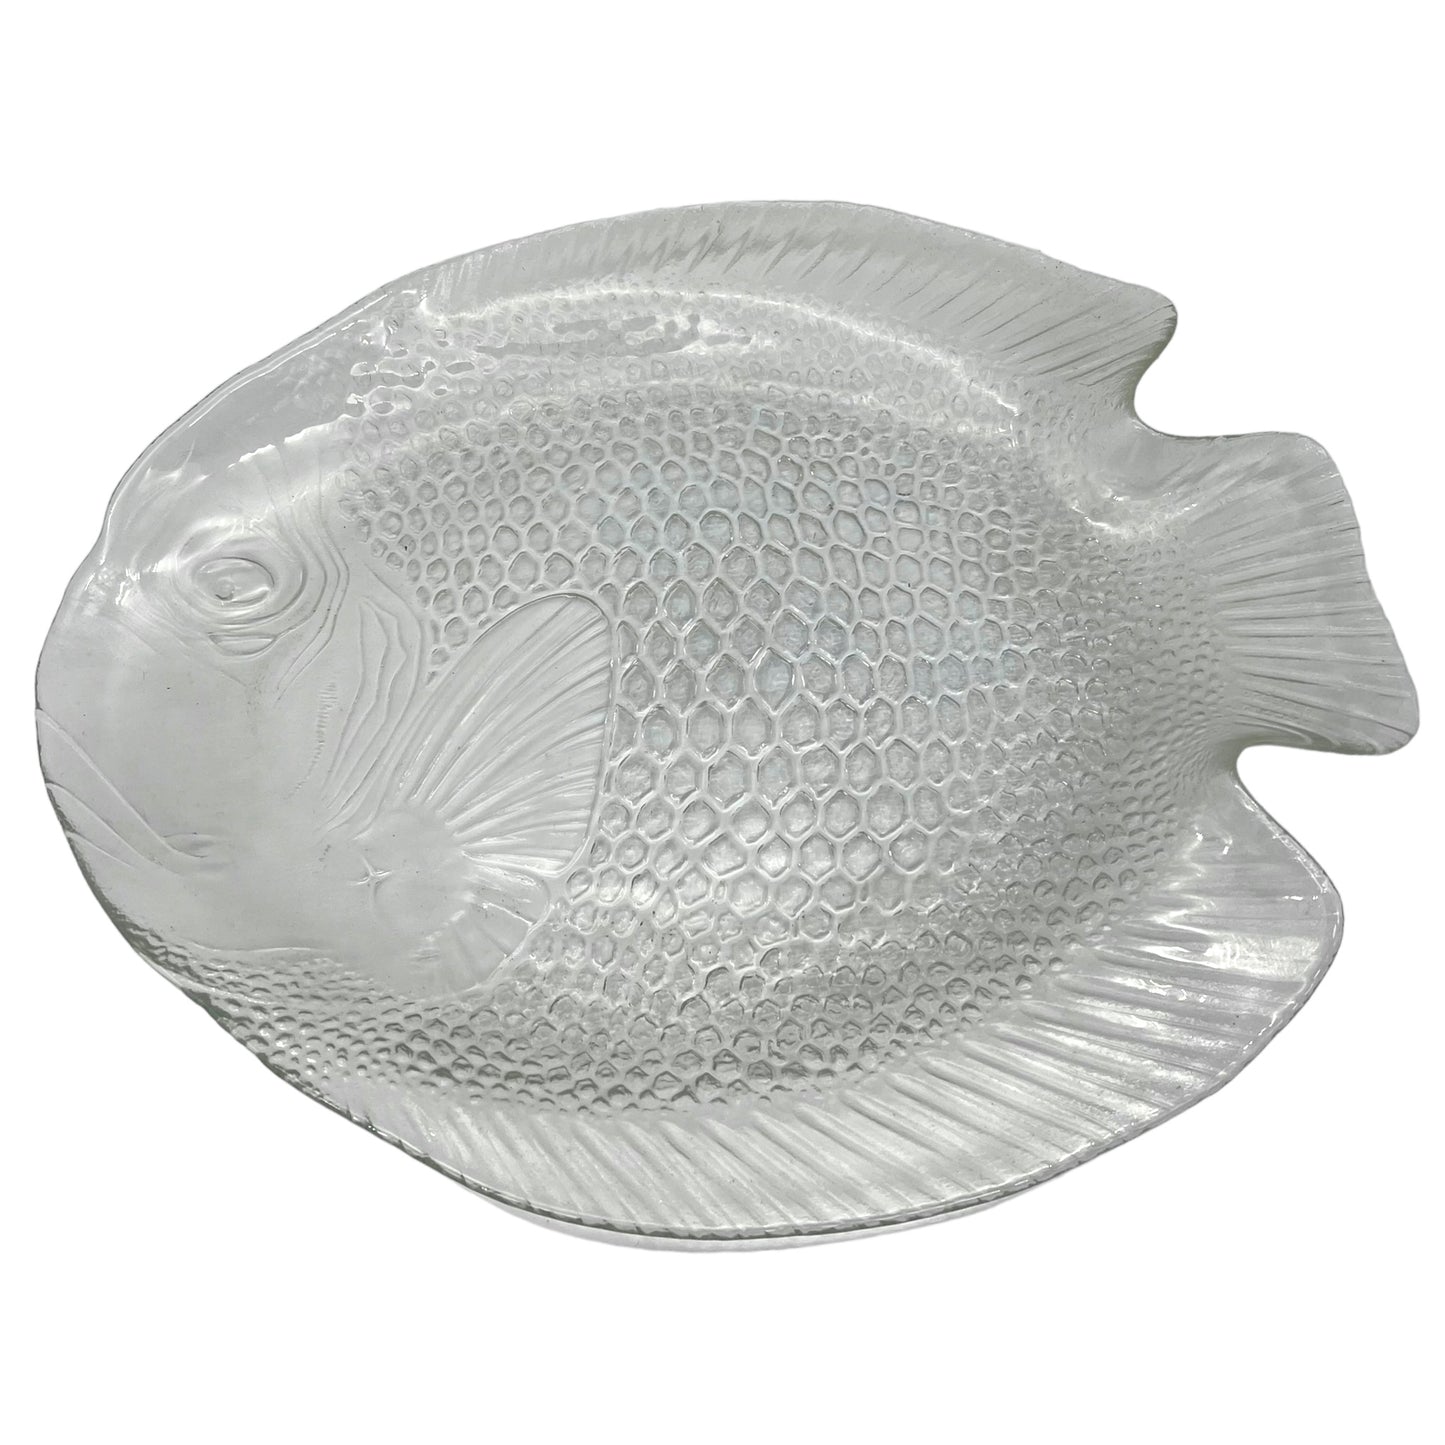 Set of 6 French Glass Fish Plates, 1 Large Platter & 5 Small Serving Plates (B4)